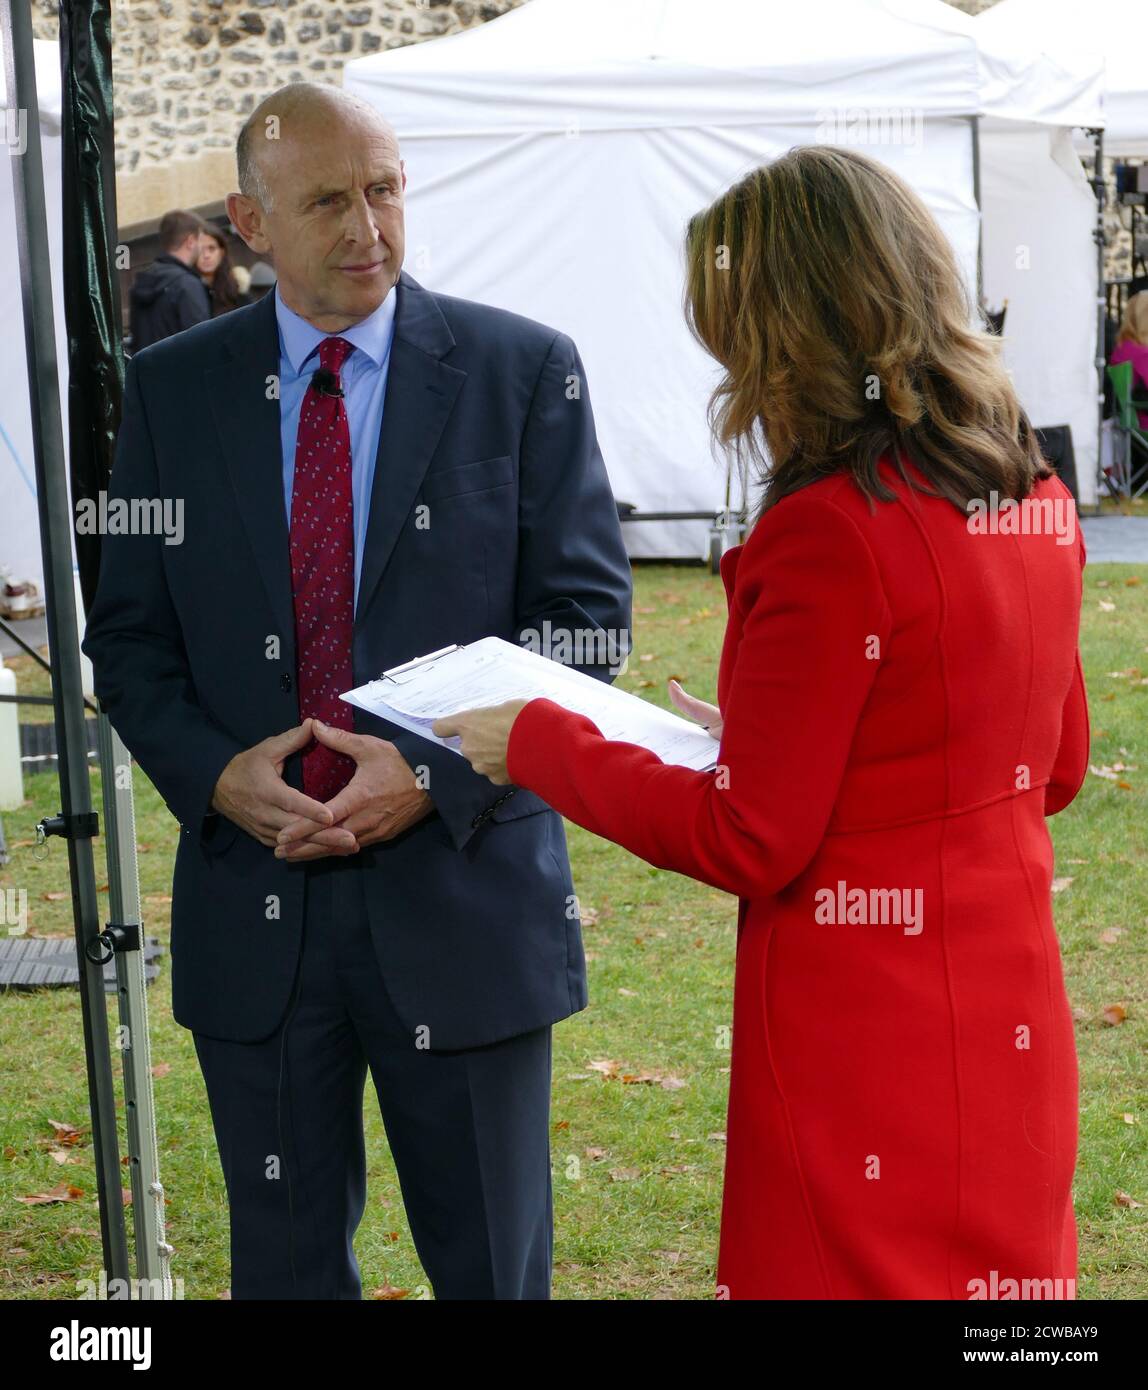 John Healey arrives to give media interviews, after returning to parliament after the prorogation was annulled by the Supreme Court. 25th September 2019. John Healey (born 1960); British Labour Party politician serving as Member of Parliament (MP) for Wentworth and Dearne since 1997 and Shadow Secretary of State for Housing since 2016. Stock Photo